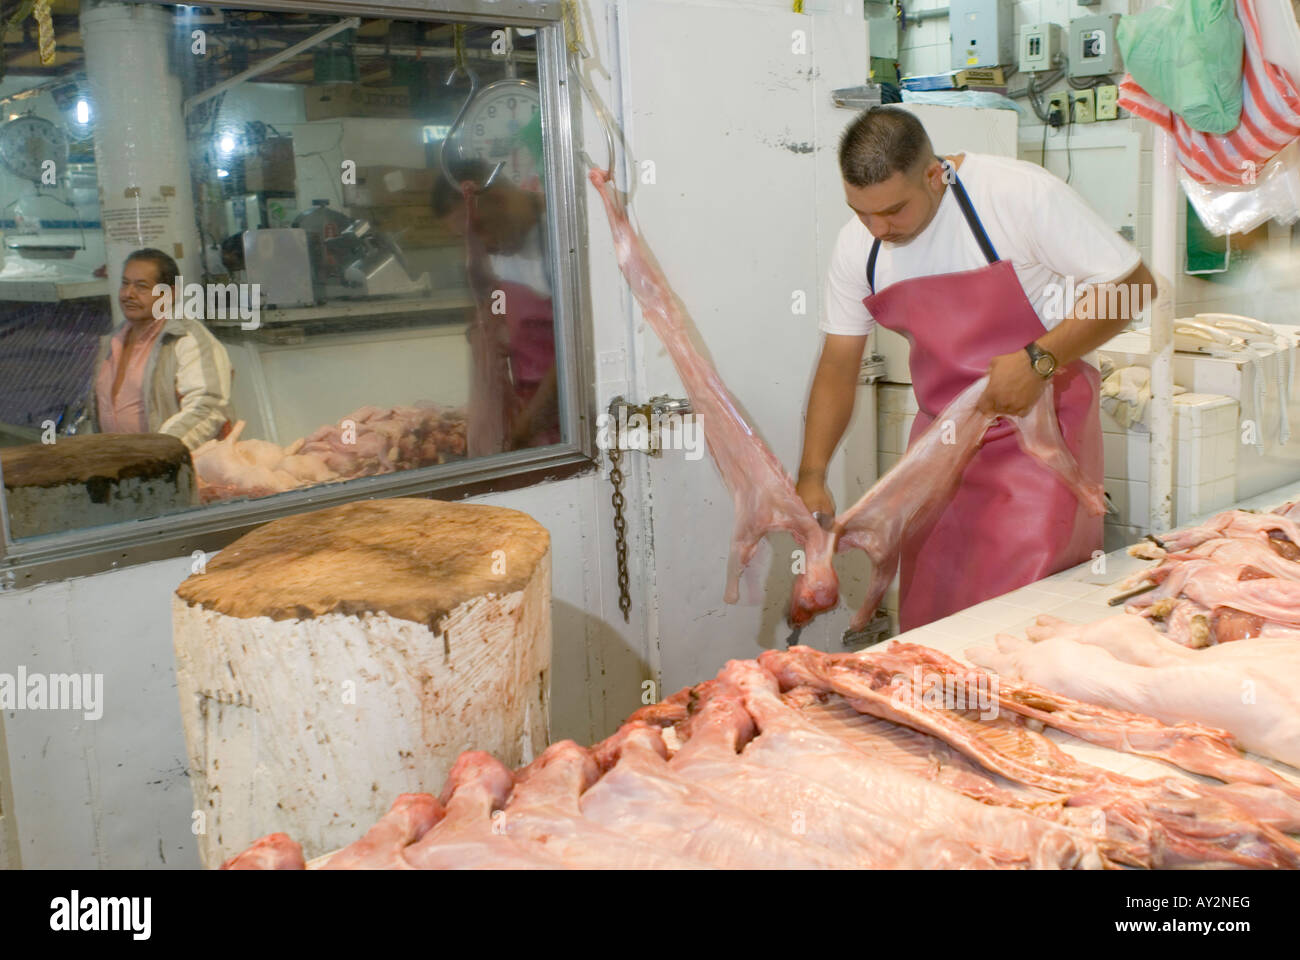 Skinning and sectioning baby goat, cabrito, at the San Jan market in Mexico City center. Stock Photo